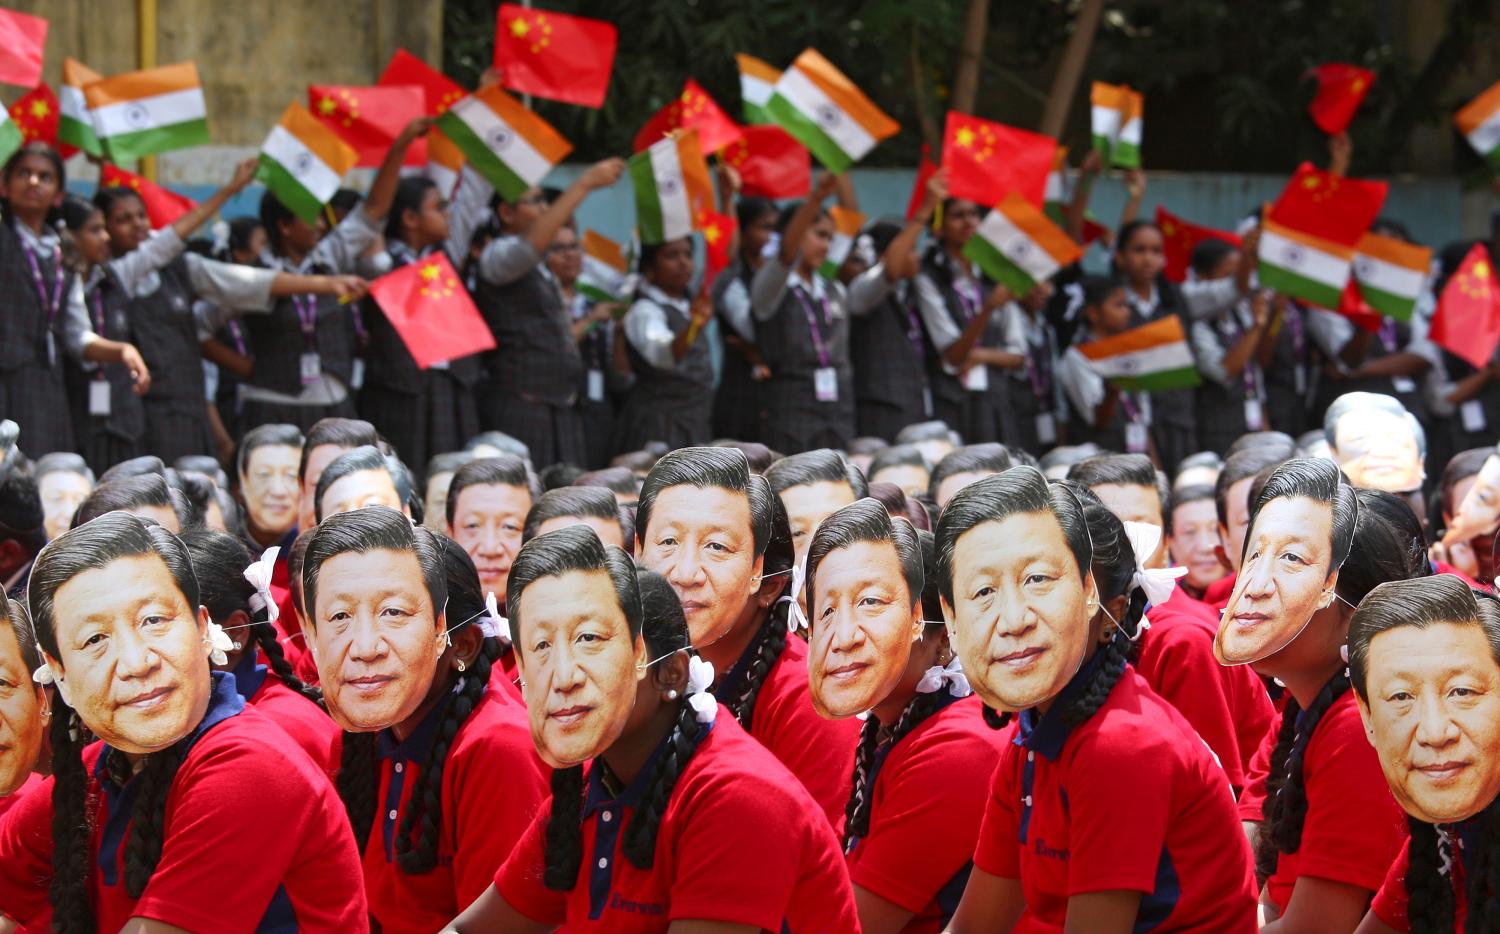 Students wear masks of China's President Xi Jinping as other waves national flags of India and China, ahead of the informal summit with India’s Prime Minister Narendra Modi, at a school in Chennai, India, October 10, 2019. REUTERS/P. Ravikumar     TPX IMAGES OF THE DAY